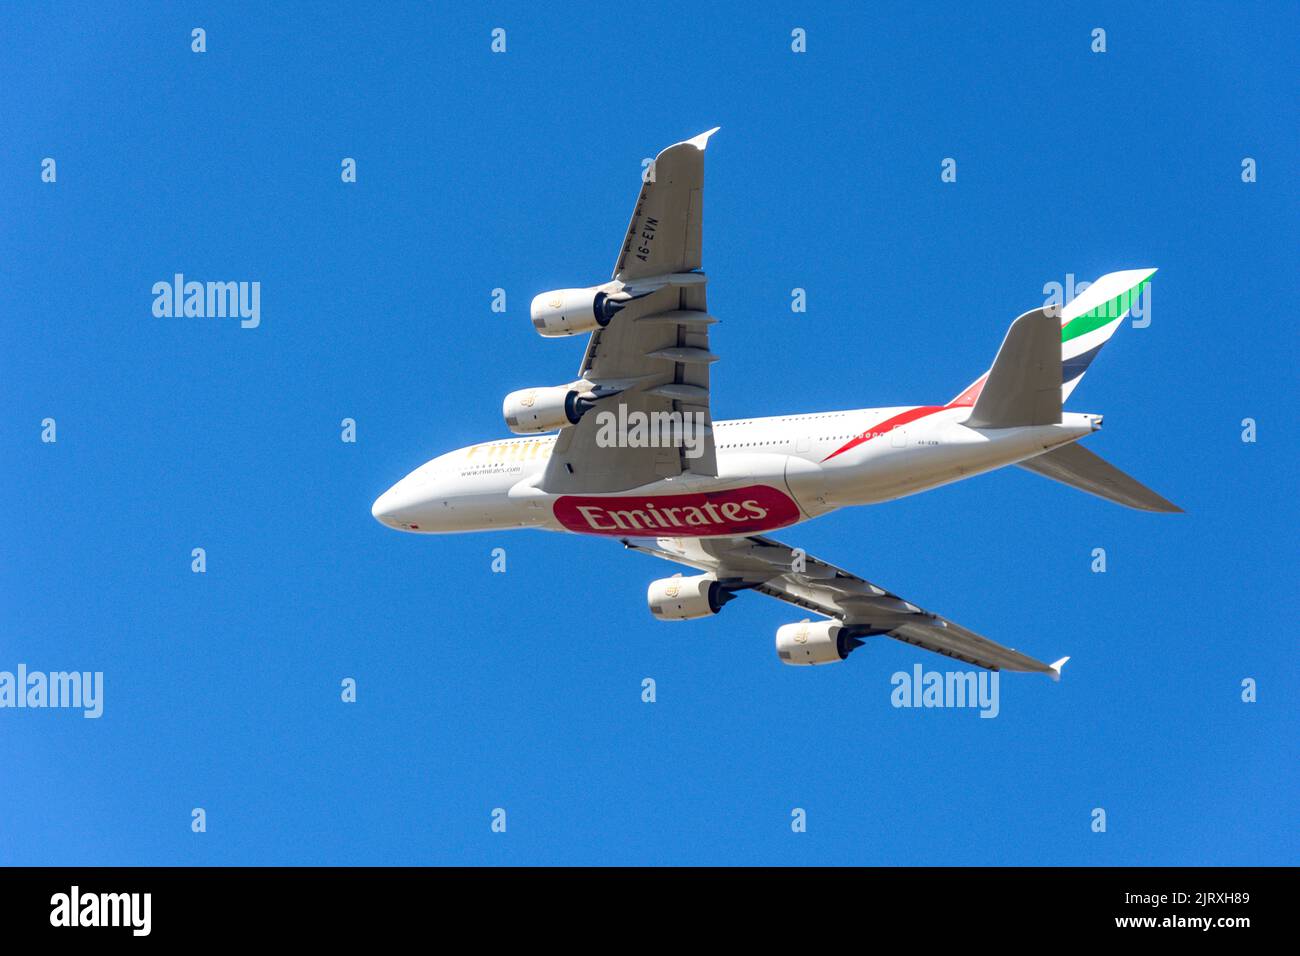 Emirates Airbus A380-842 aircraft taking off from Heathrow Airport, Greater London, England, United Kingdom Stock Photo